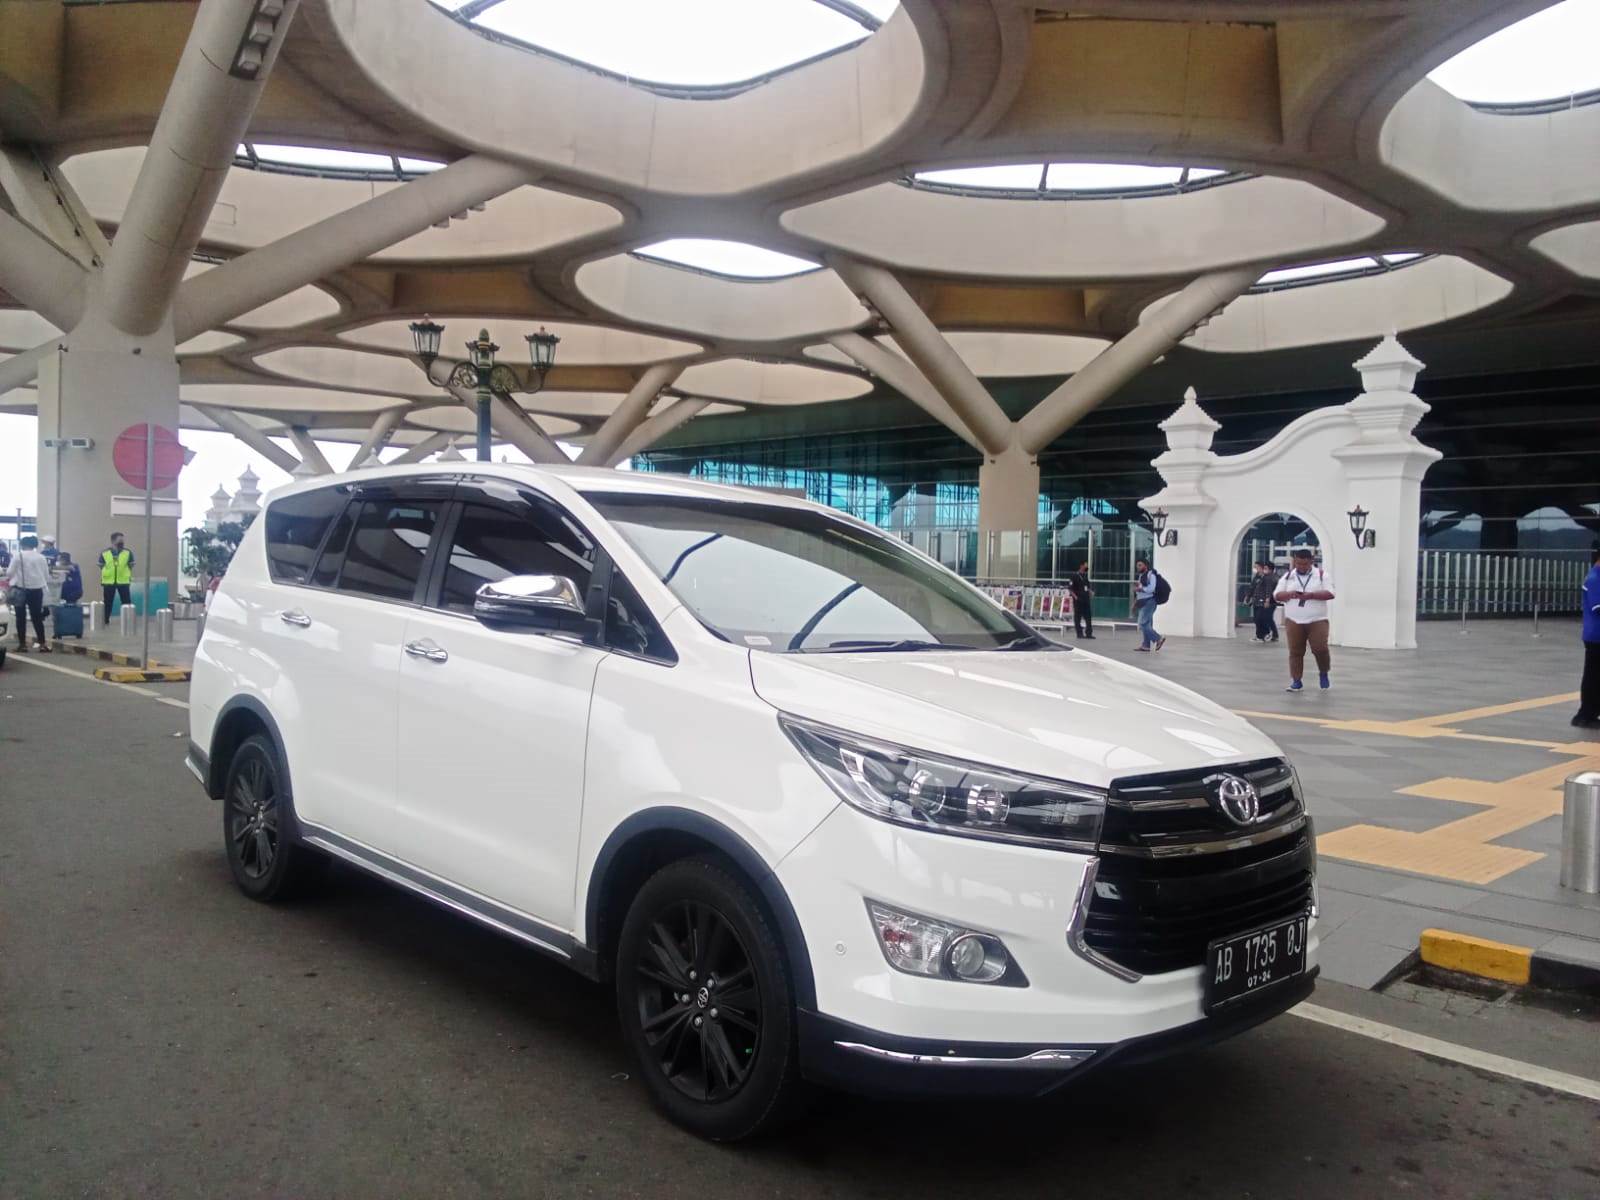 Mobil Alinds Transport Standby di YIA